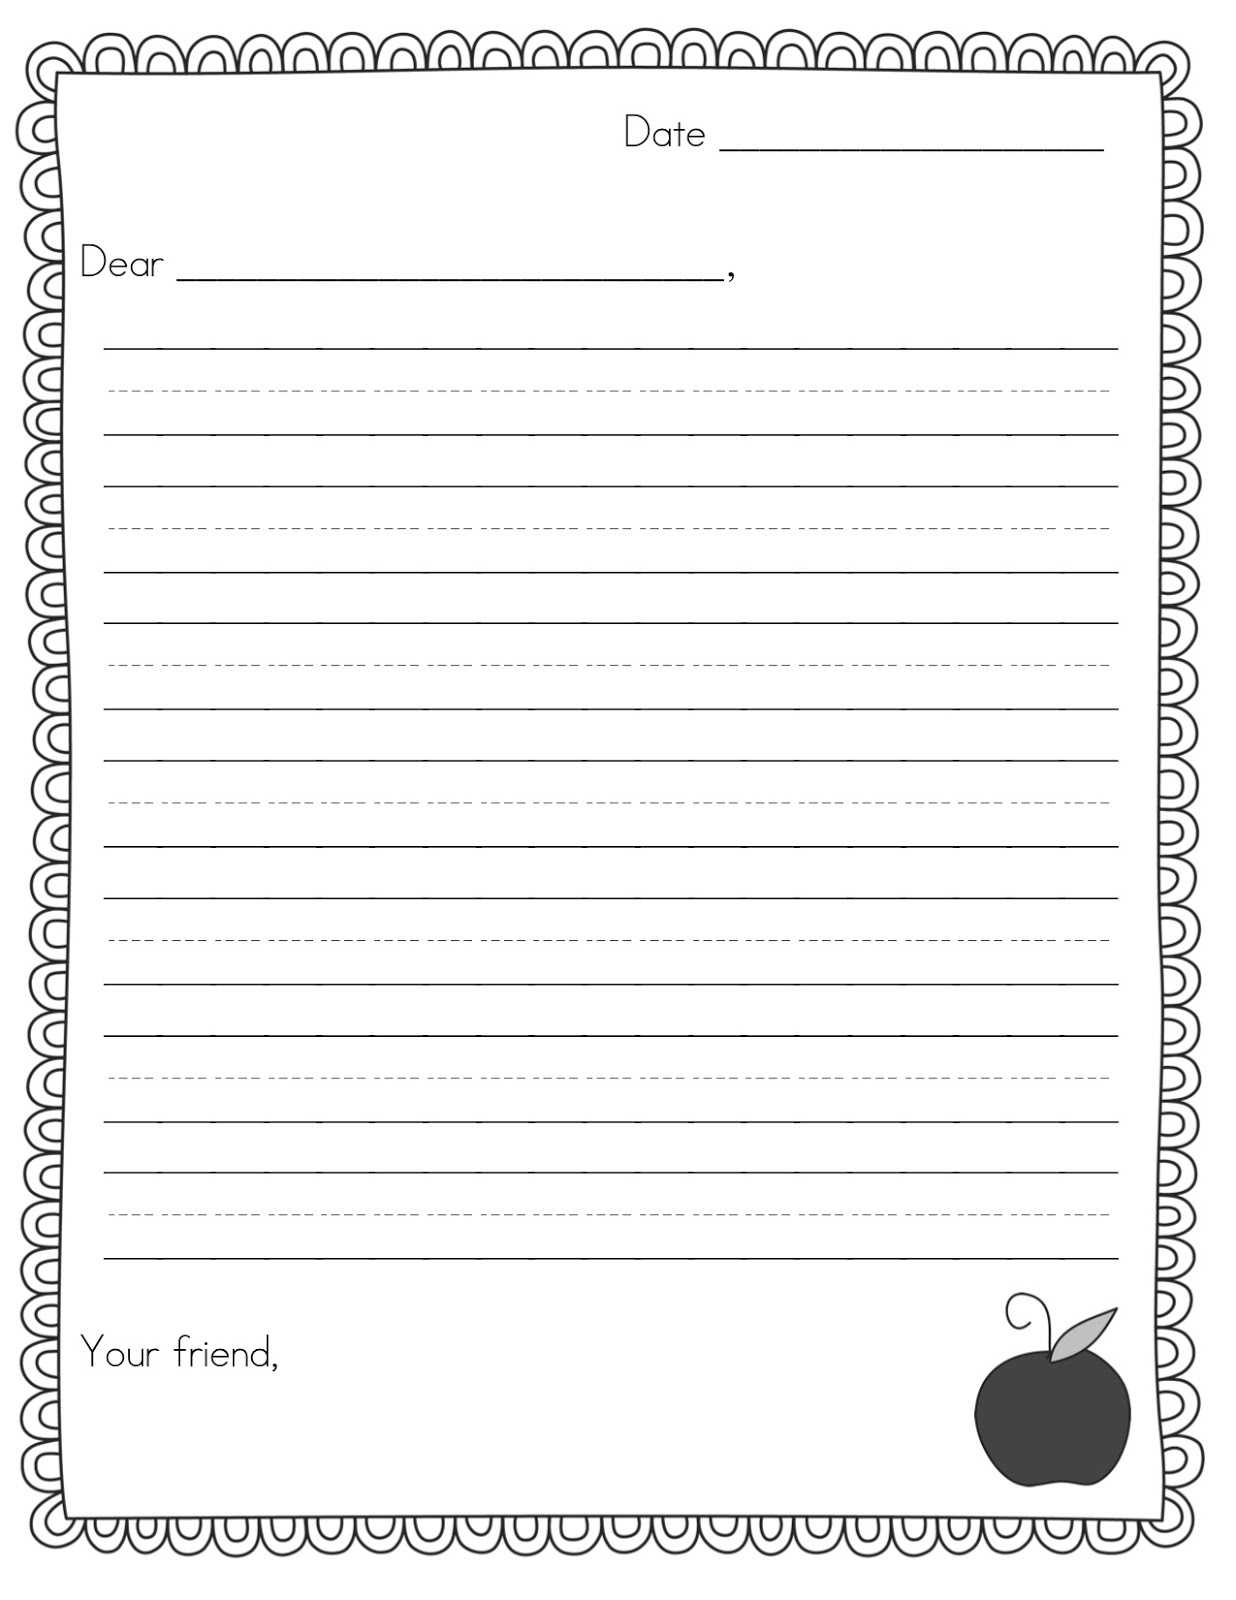 Free Letter Writing Template – Tomope.zaribanks.co Regarding Blank Letter Writing Template For Kids